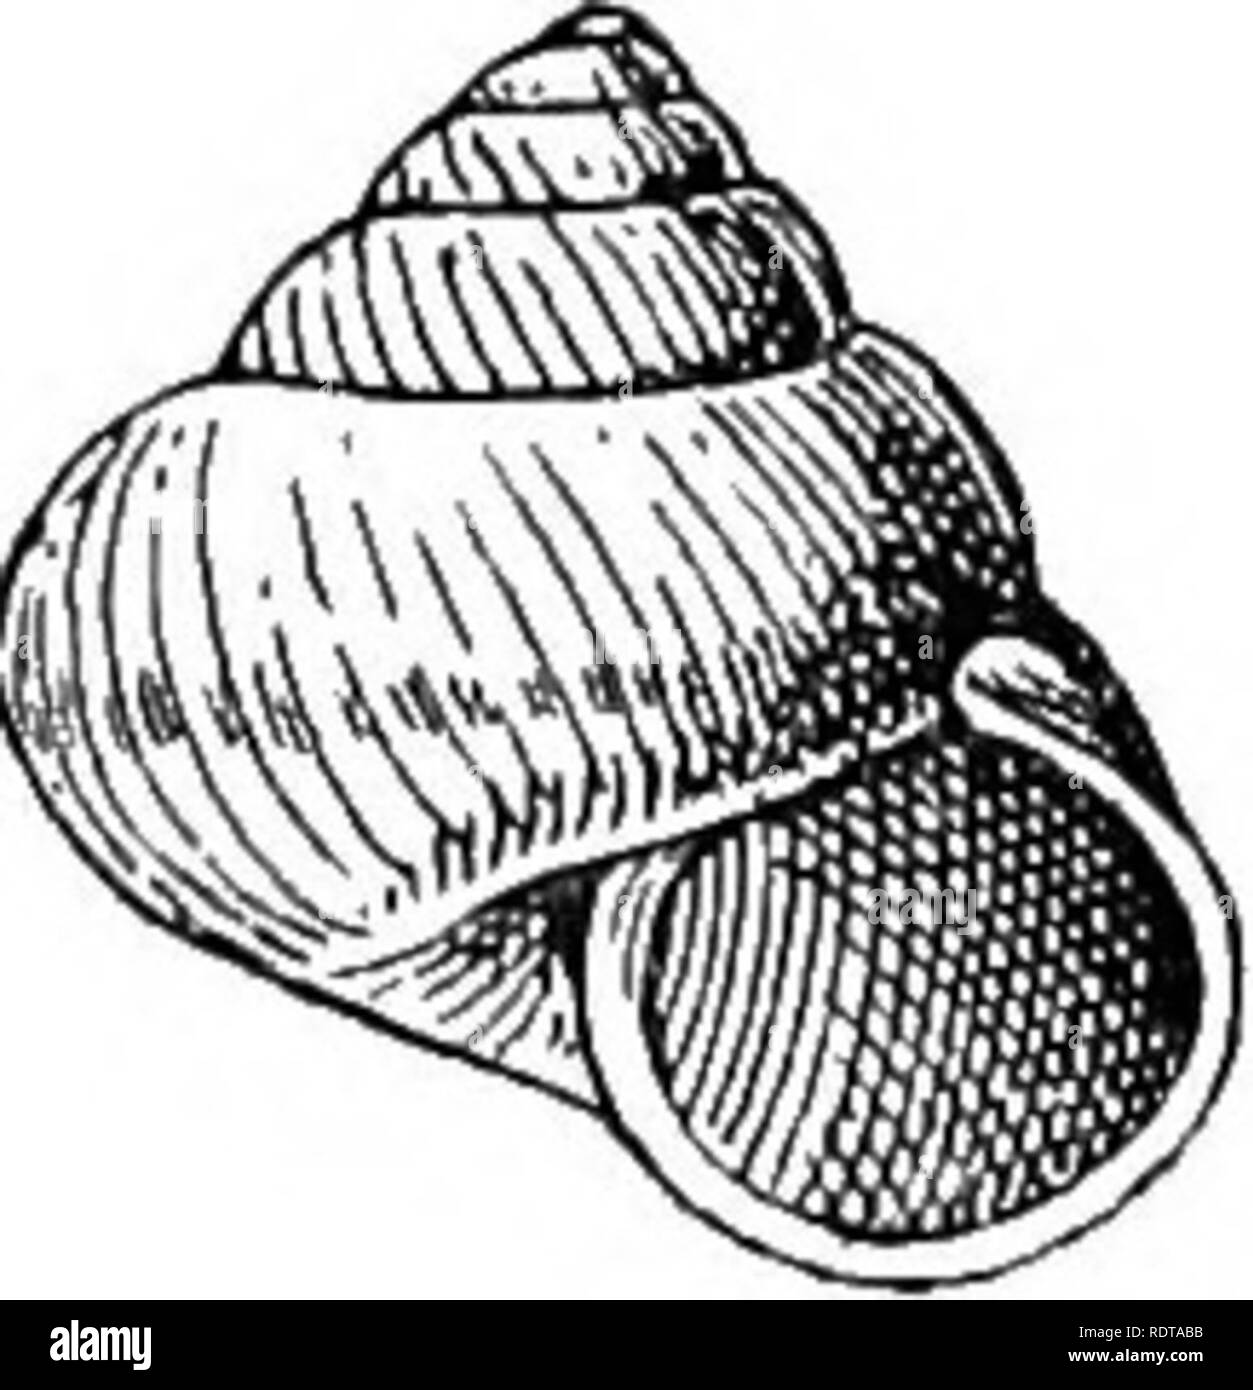 . Mollusca ... Mollusks. 14 OXOLOPHOBIDjB. Original description :—&quot; Shell ovately turbinate, with 5^ convex whorls, the last globosely swollen ; suture distinct; apex acute ; umbilieuB very narrow, much smaller than in any of the other Indian species, almost entirely covered by the peristome ; almost quite smooth, even under a lens, scarcely any trace of spiral sculpture; light brown colour, elegantly flamed with darker brown ; aperture round, with a double peristome, the outer margin very thin, broadly reflected; operculum thin, multispiral, light colour, on the interior side polished an Stock Photo